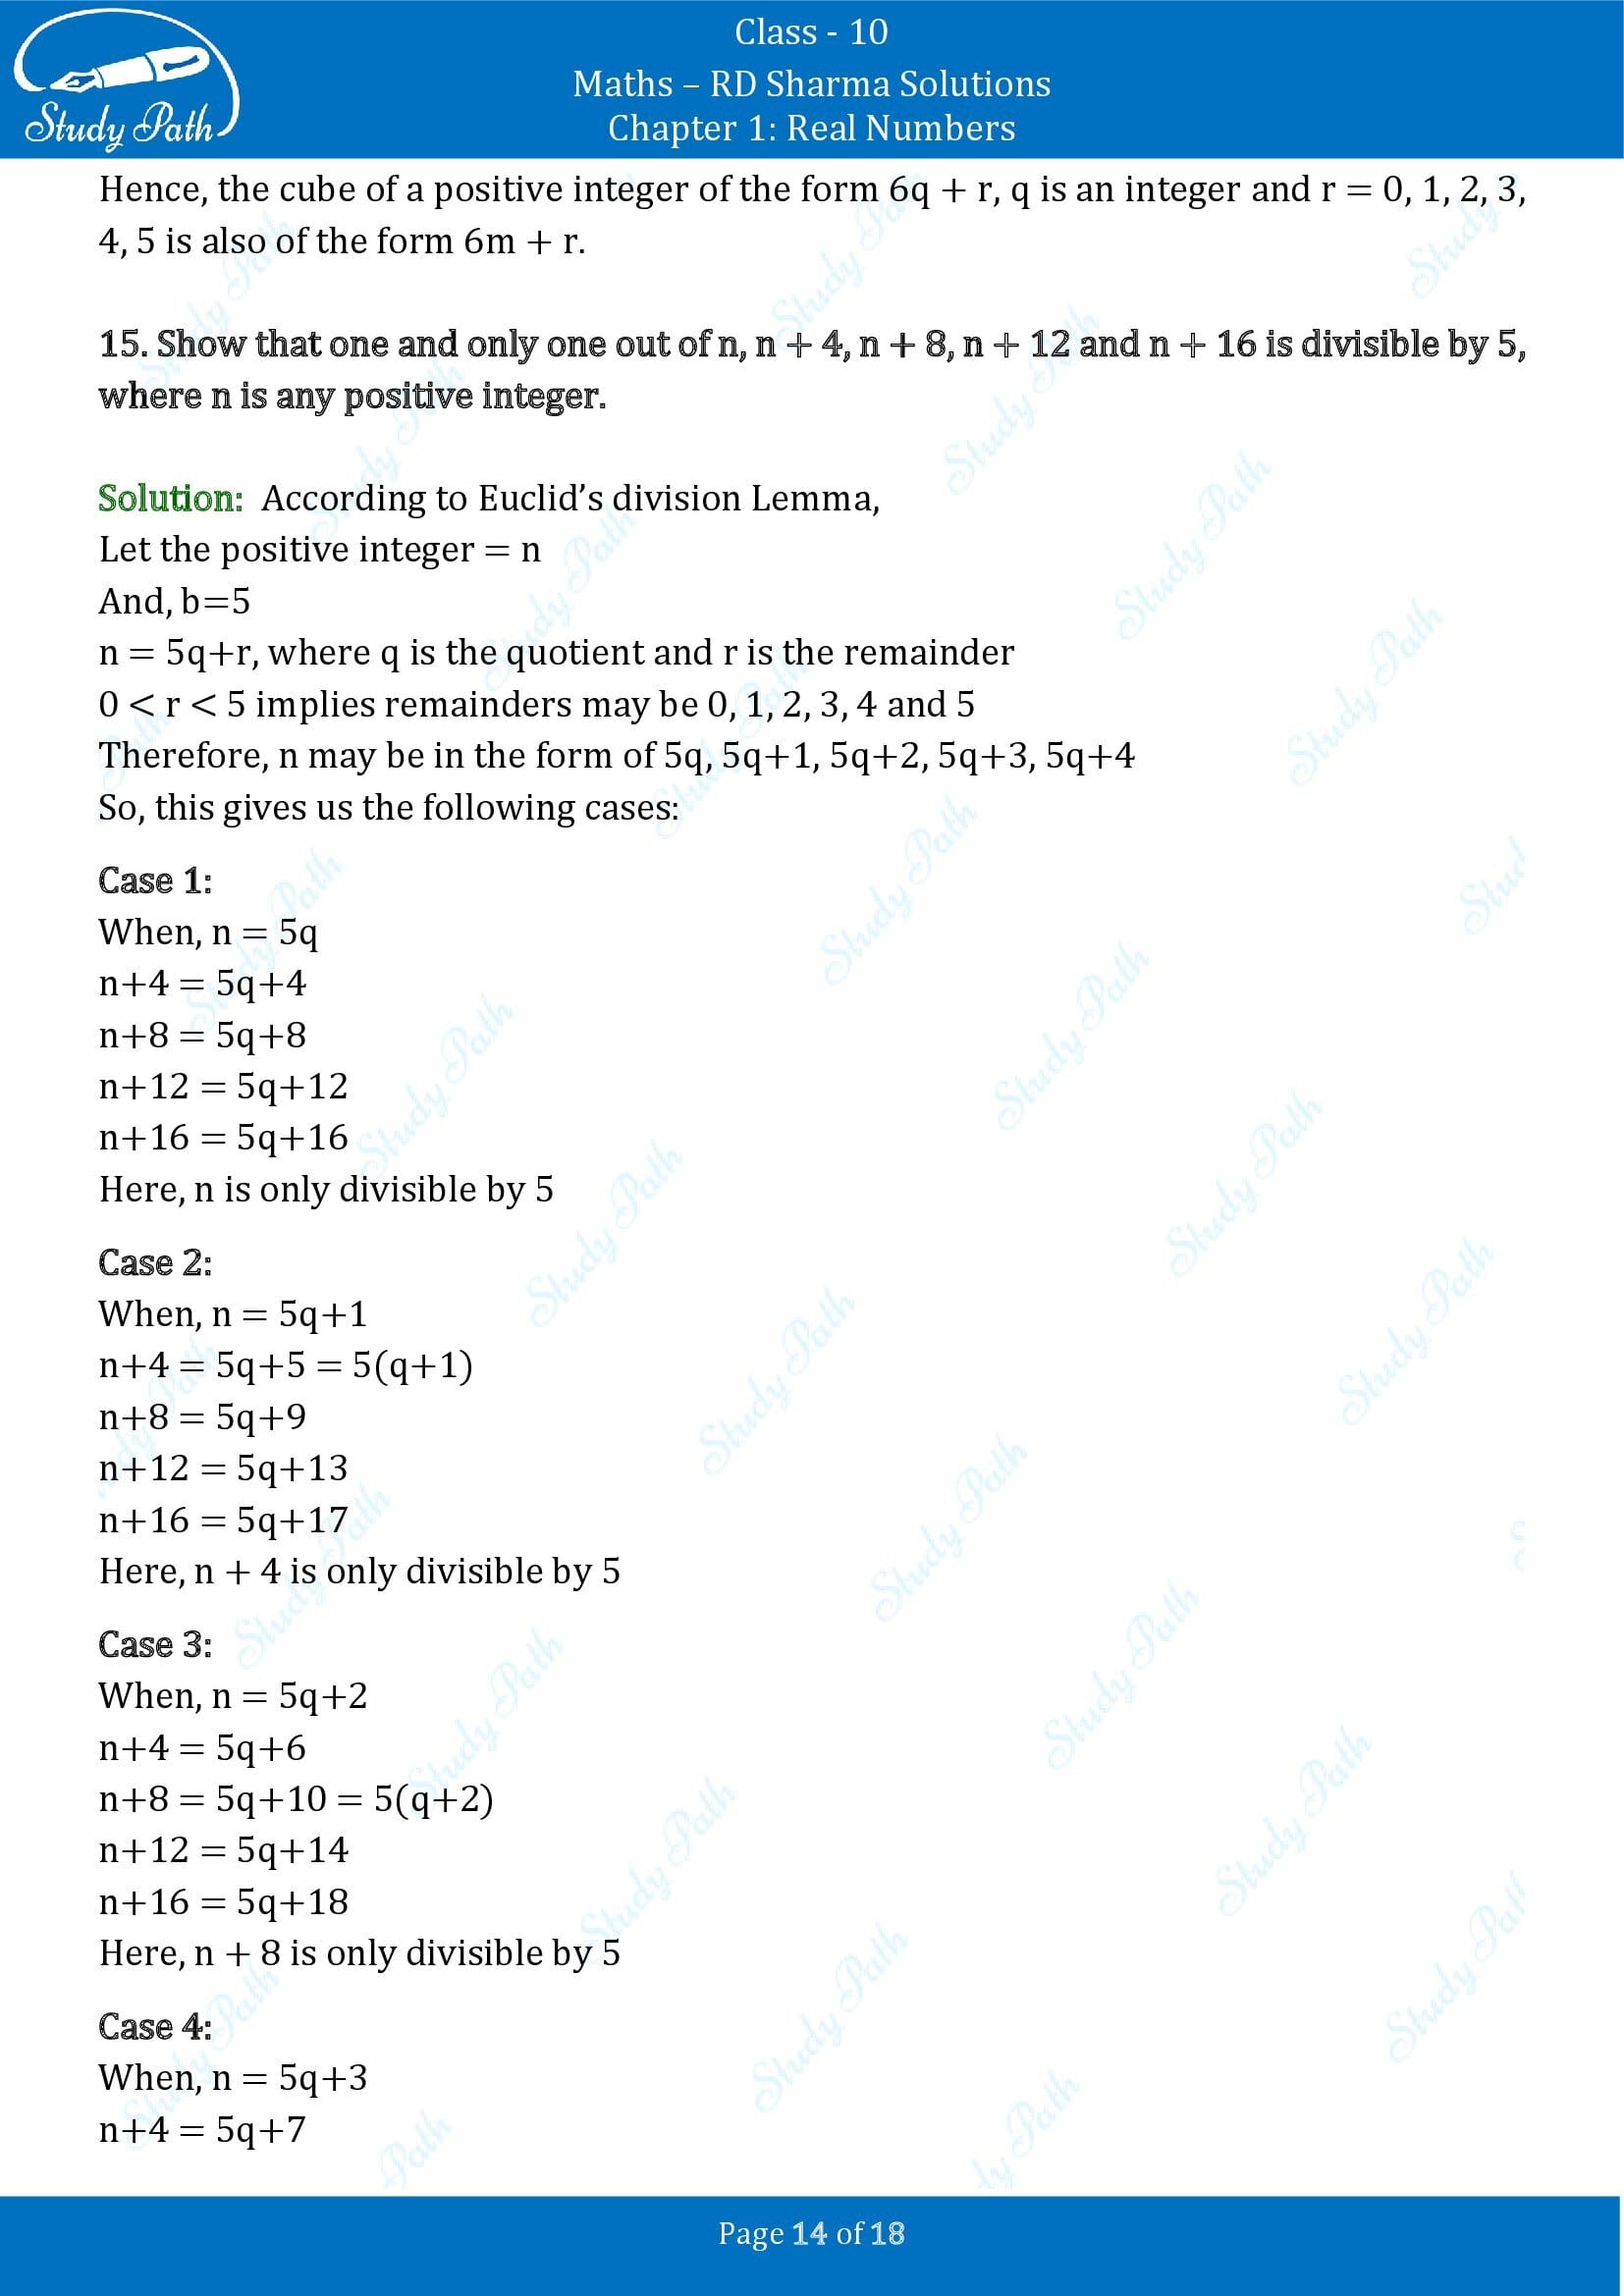 RD Sharma Solutions Class 10 Chapter 1 Real Numbers Exercise 1.1 00014